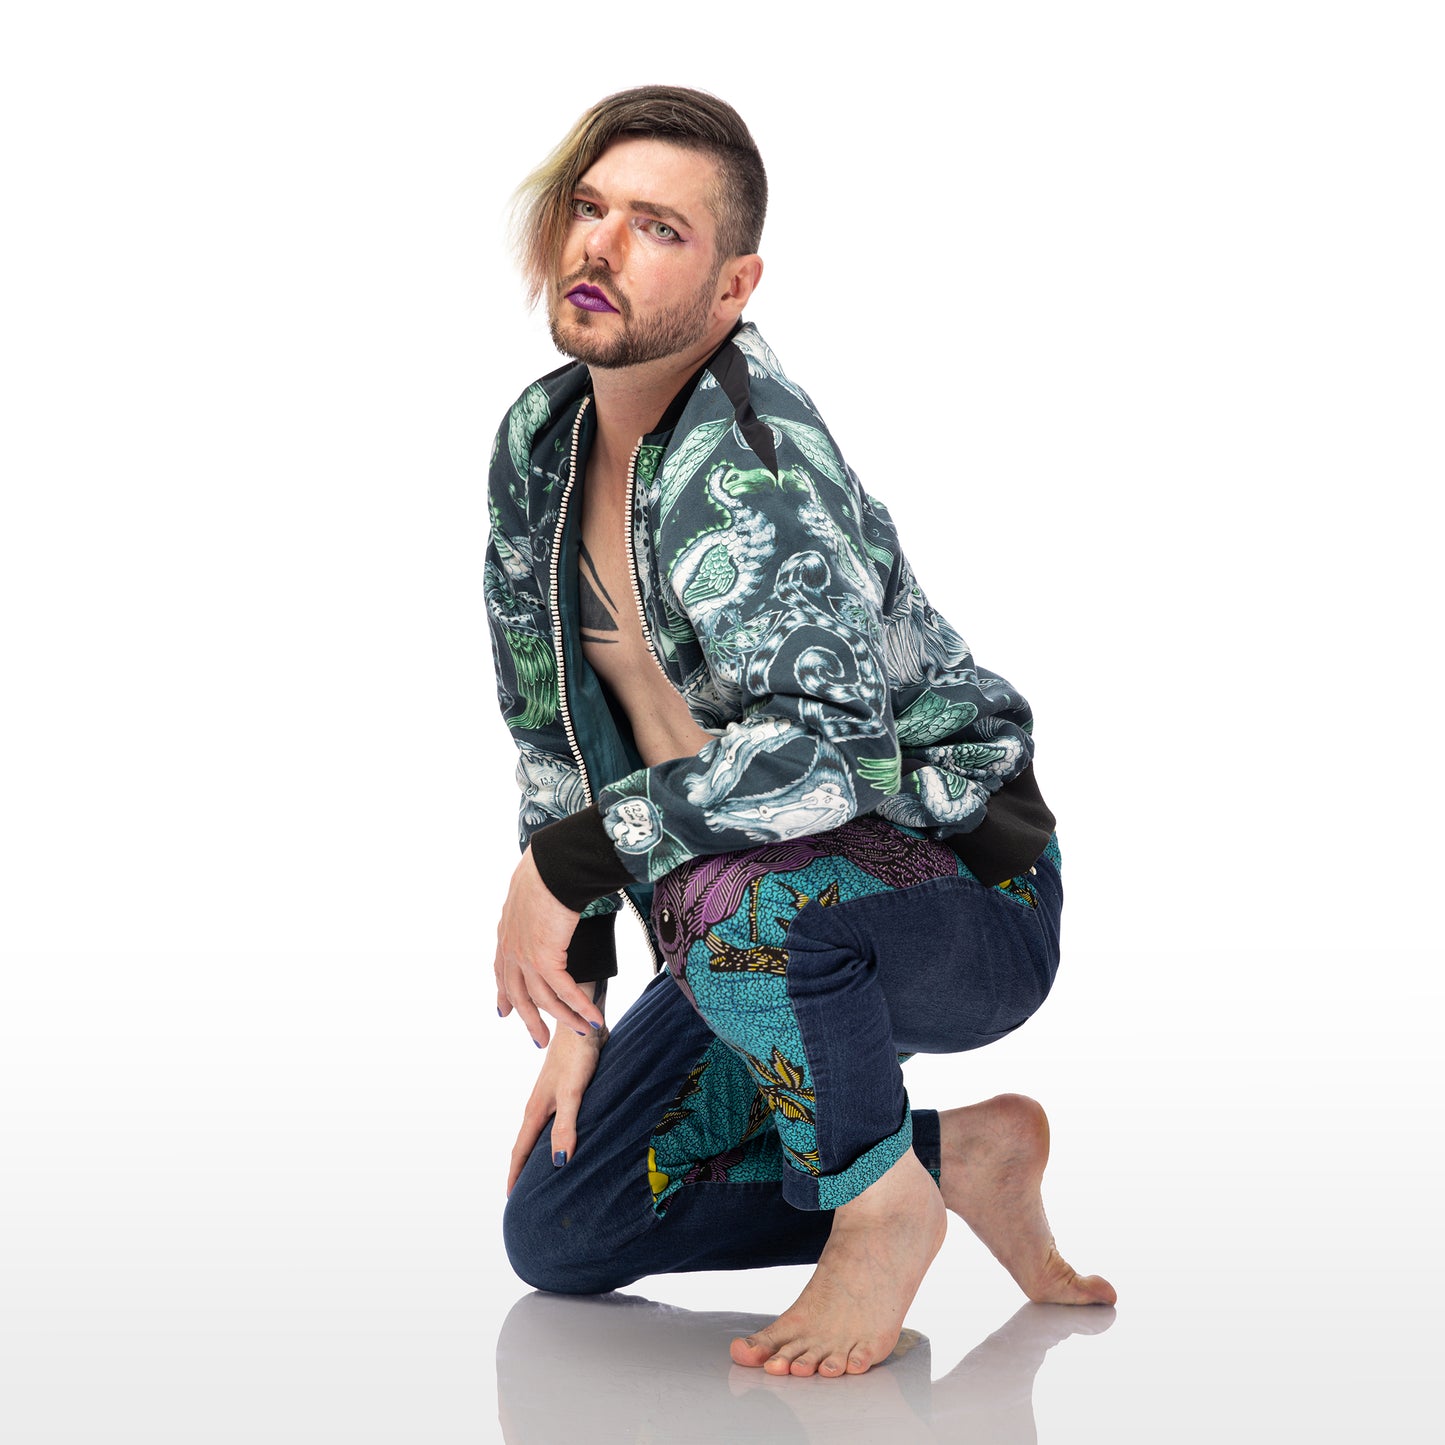 Extinct Bomber Jacket, a handmade-to-order piece made from cotton satin fabric printed with a blue and green sketched design of lions, dodos and monkeys with skeletons showing. This zip up bomber jacket has raglan sleeves, front welt pockets and ribbed collar, cuffs and waistband. Model Max kneels on the floor with one knee and leans on the other. 